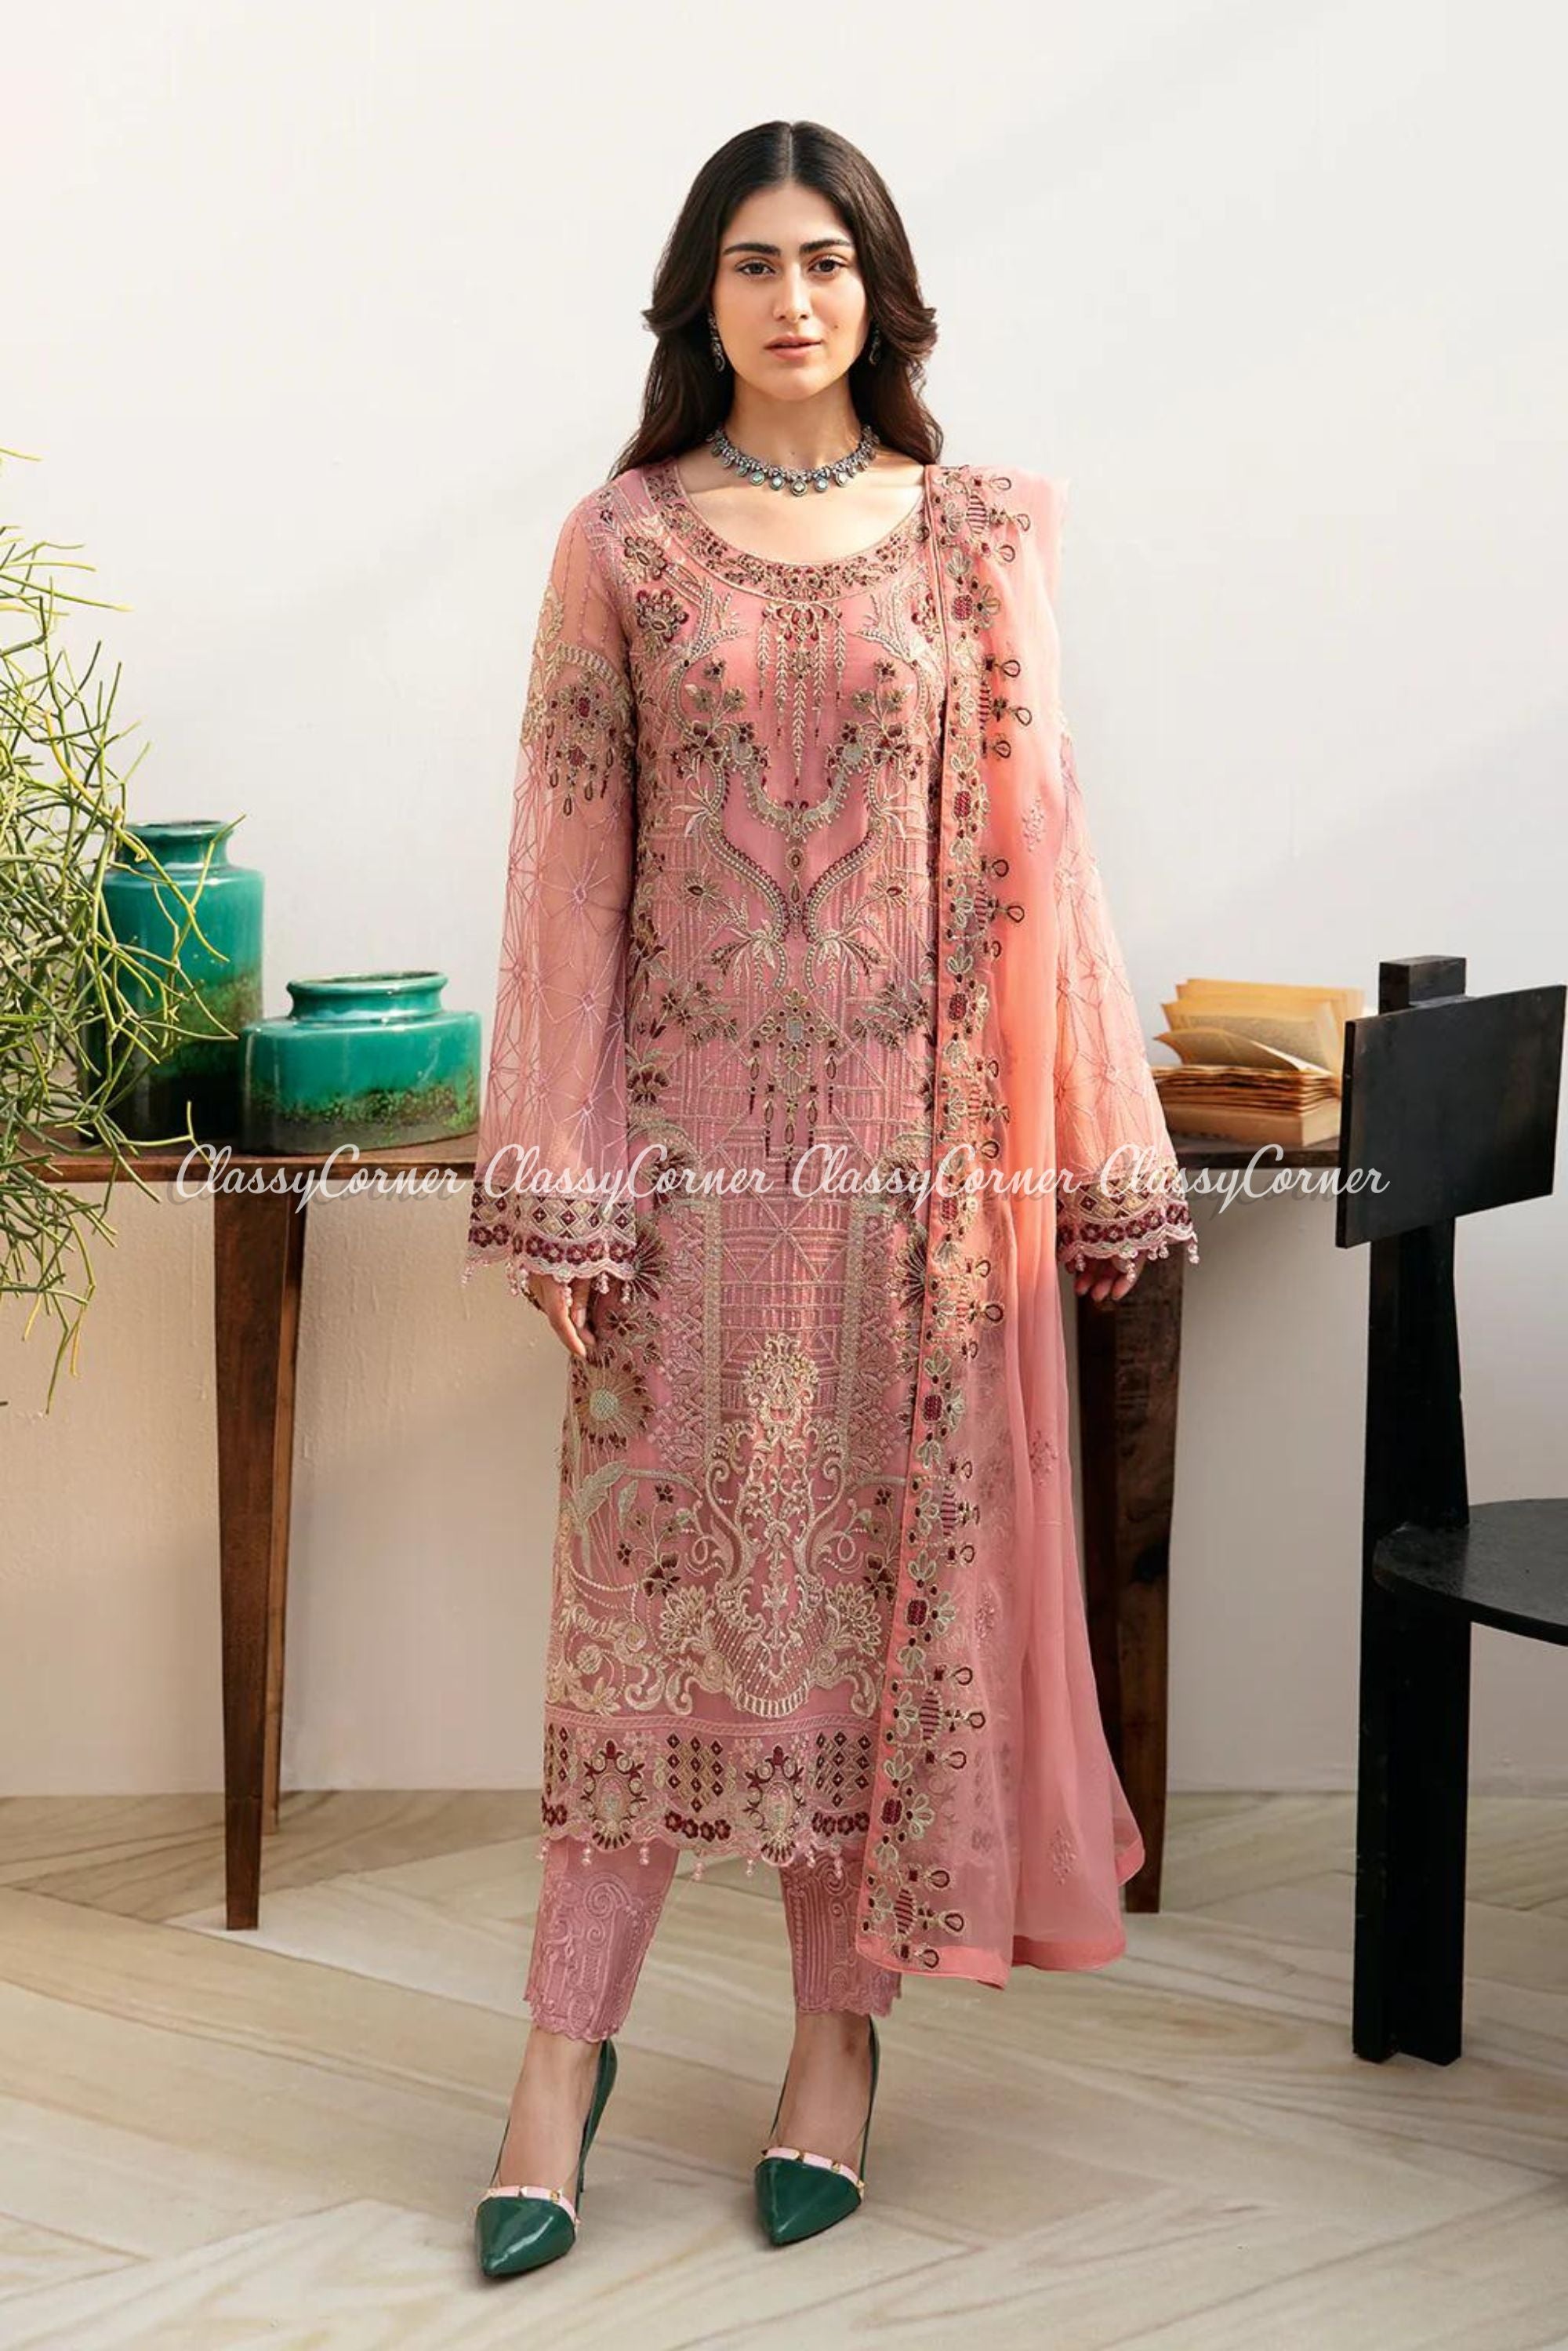 pakistani wedding outfits for ladies